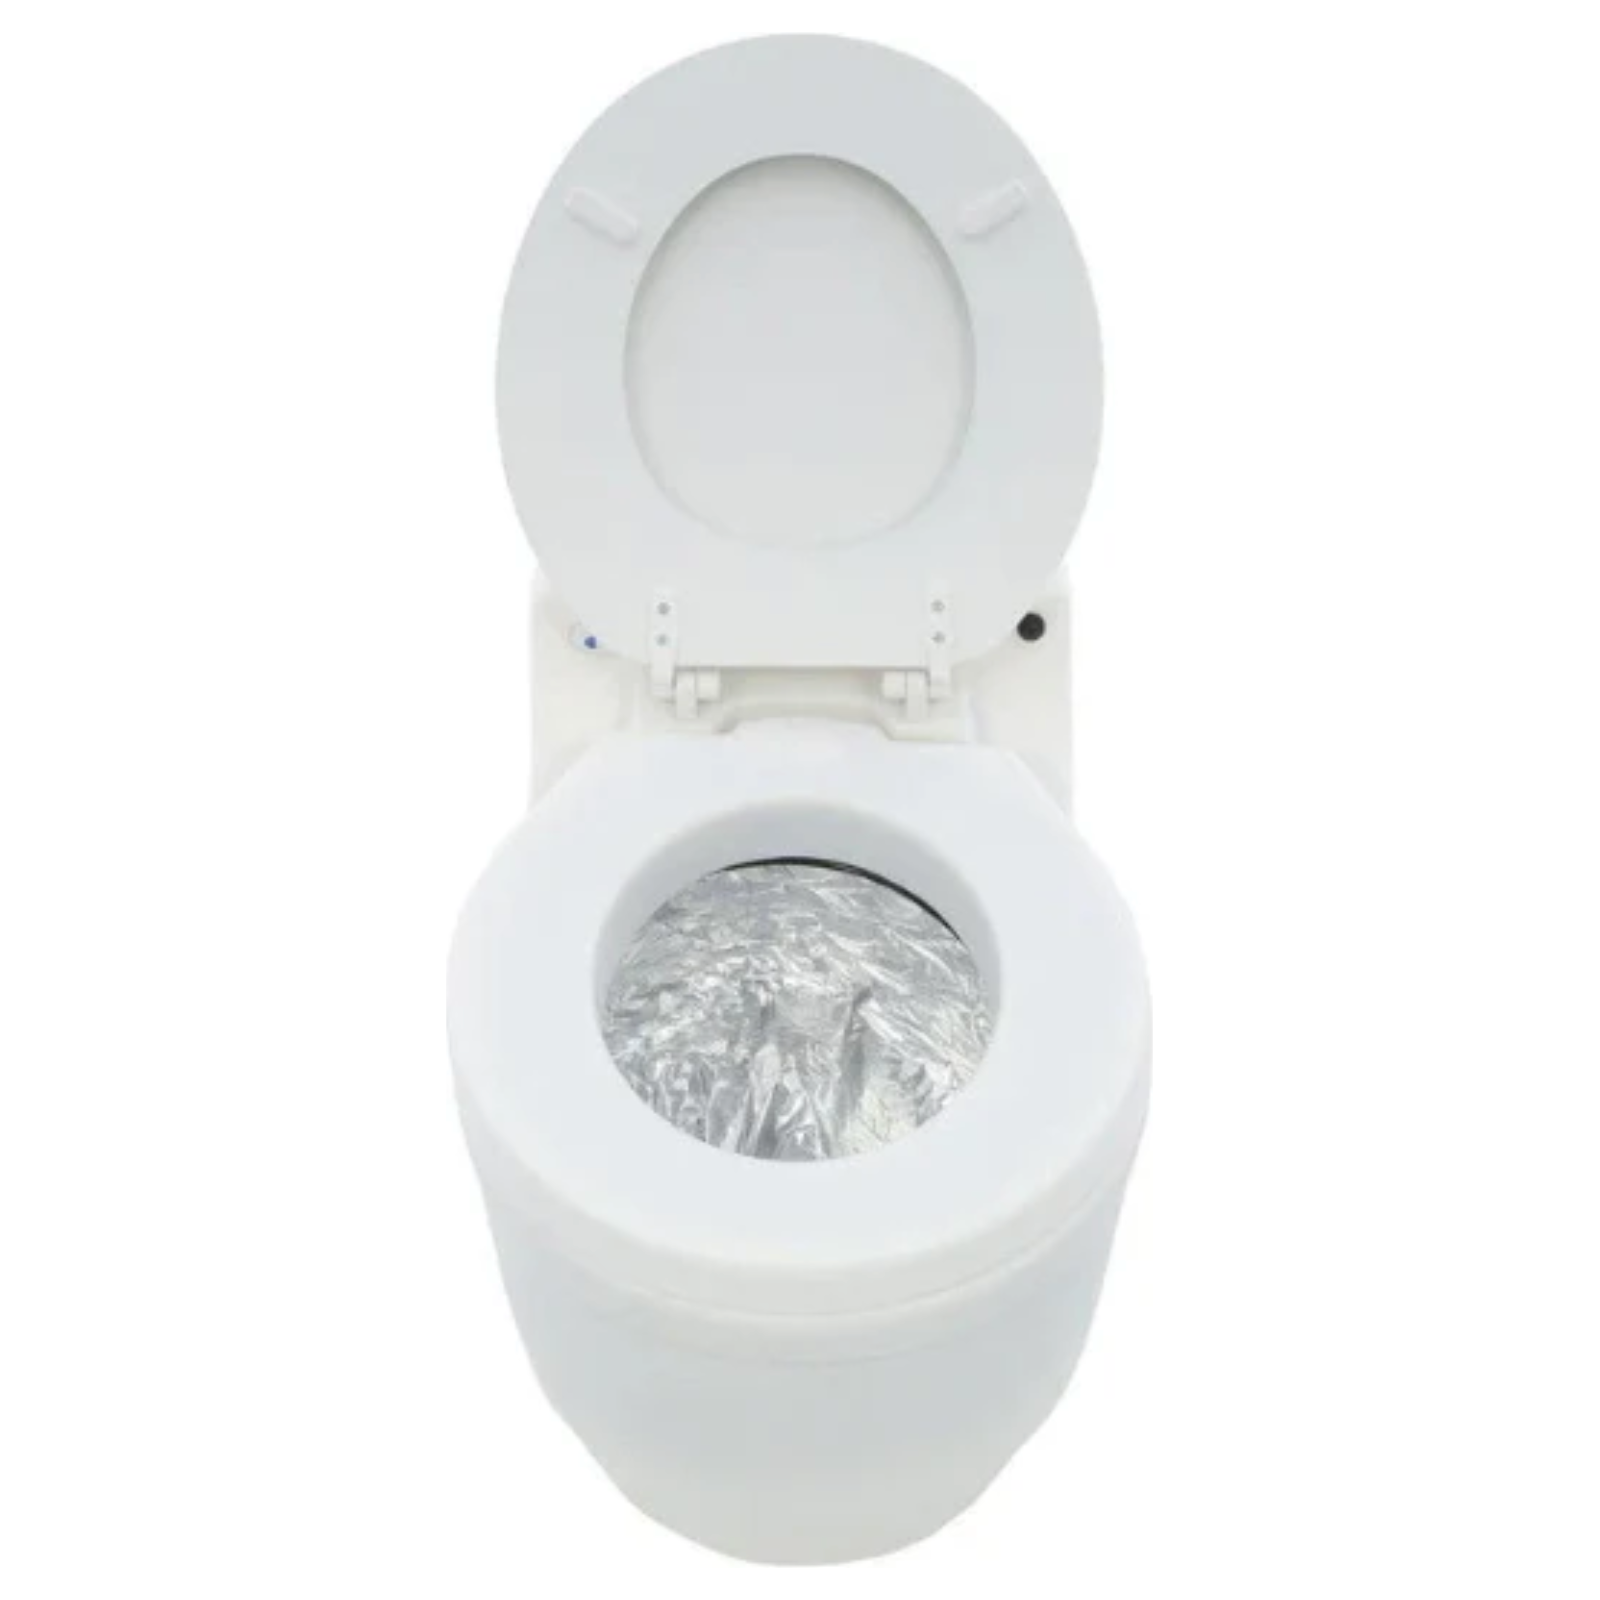 Laveo Dry Flush Portable Electric Waterless Toilet with with Car Adapter Plug 12V DF1045DC